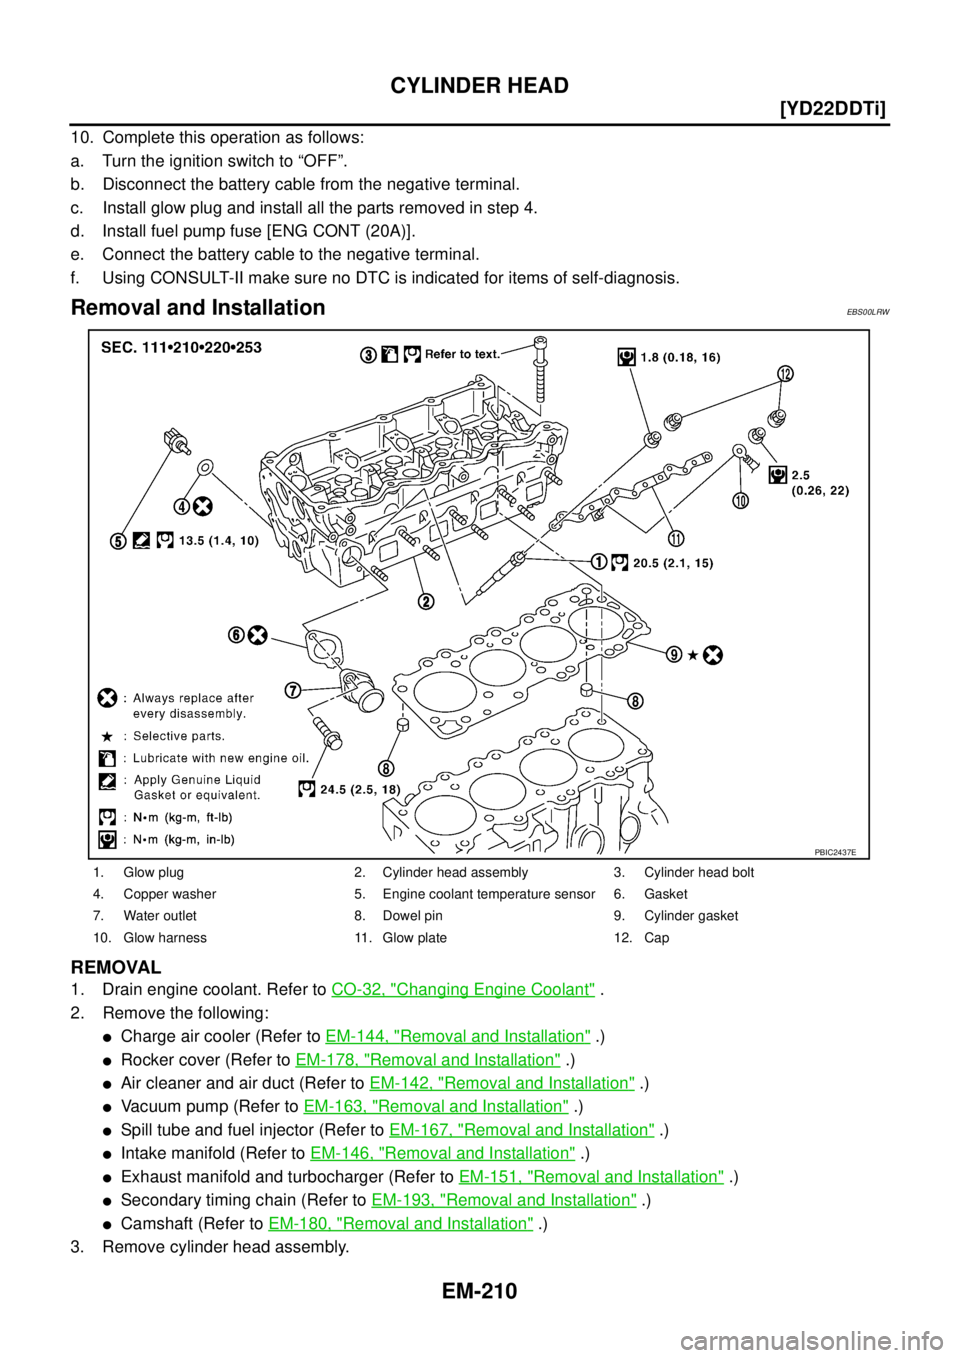 NISSAN X-TRAIL 2005  Service Repair Manual EM-210
[YD22DDTi]
CYLINDER HEAD
 
10. Complete this operation as follows:
a. Turn the ignition switch to “OFF”. 
b. Disconnect the battery cable from the negative terminal. 
c. Install glow plug a